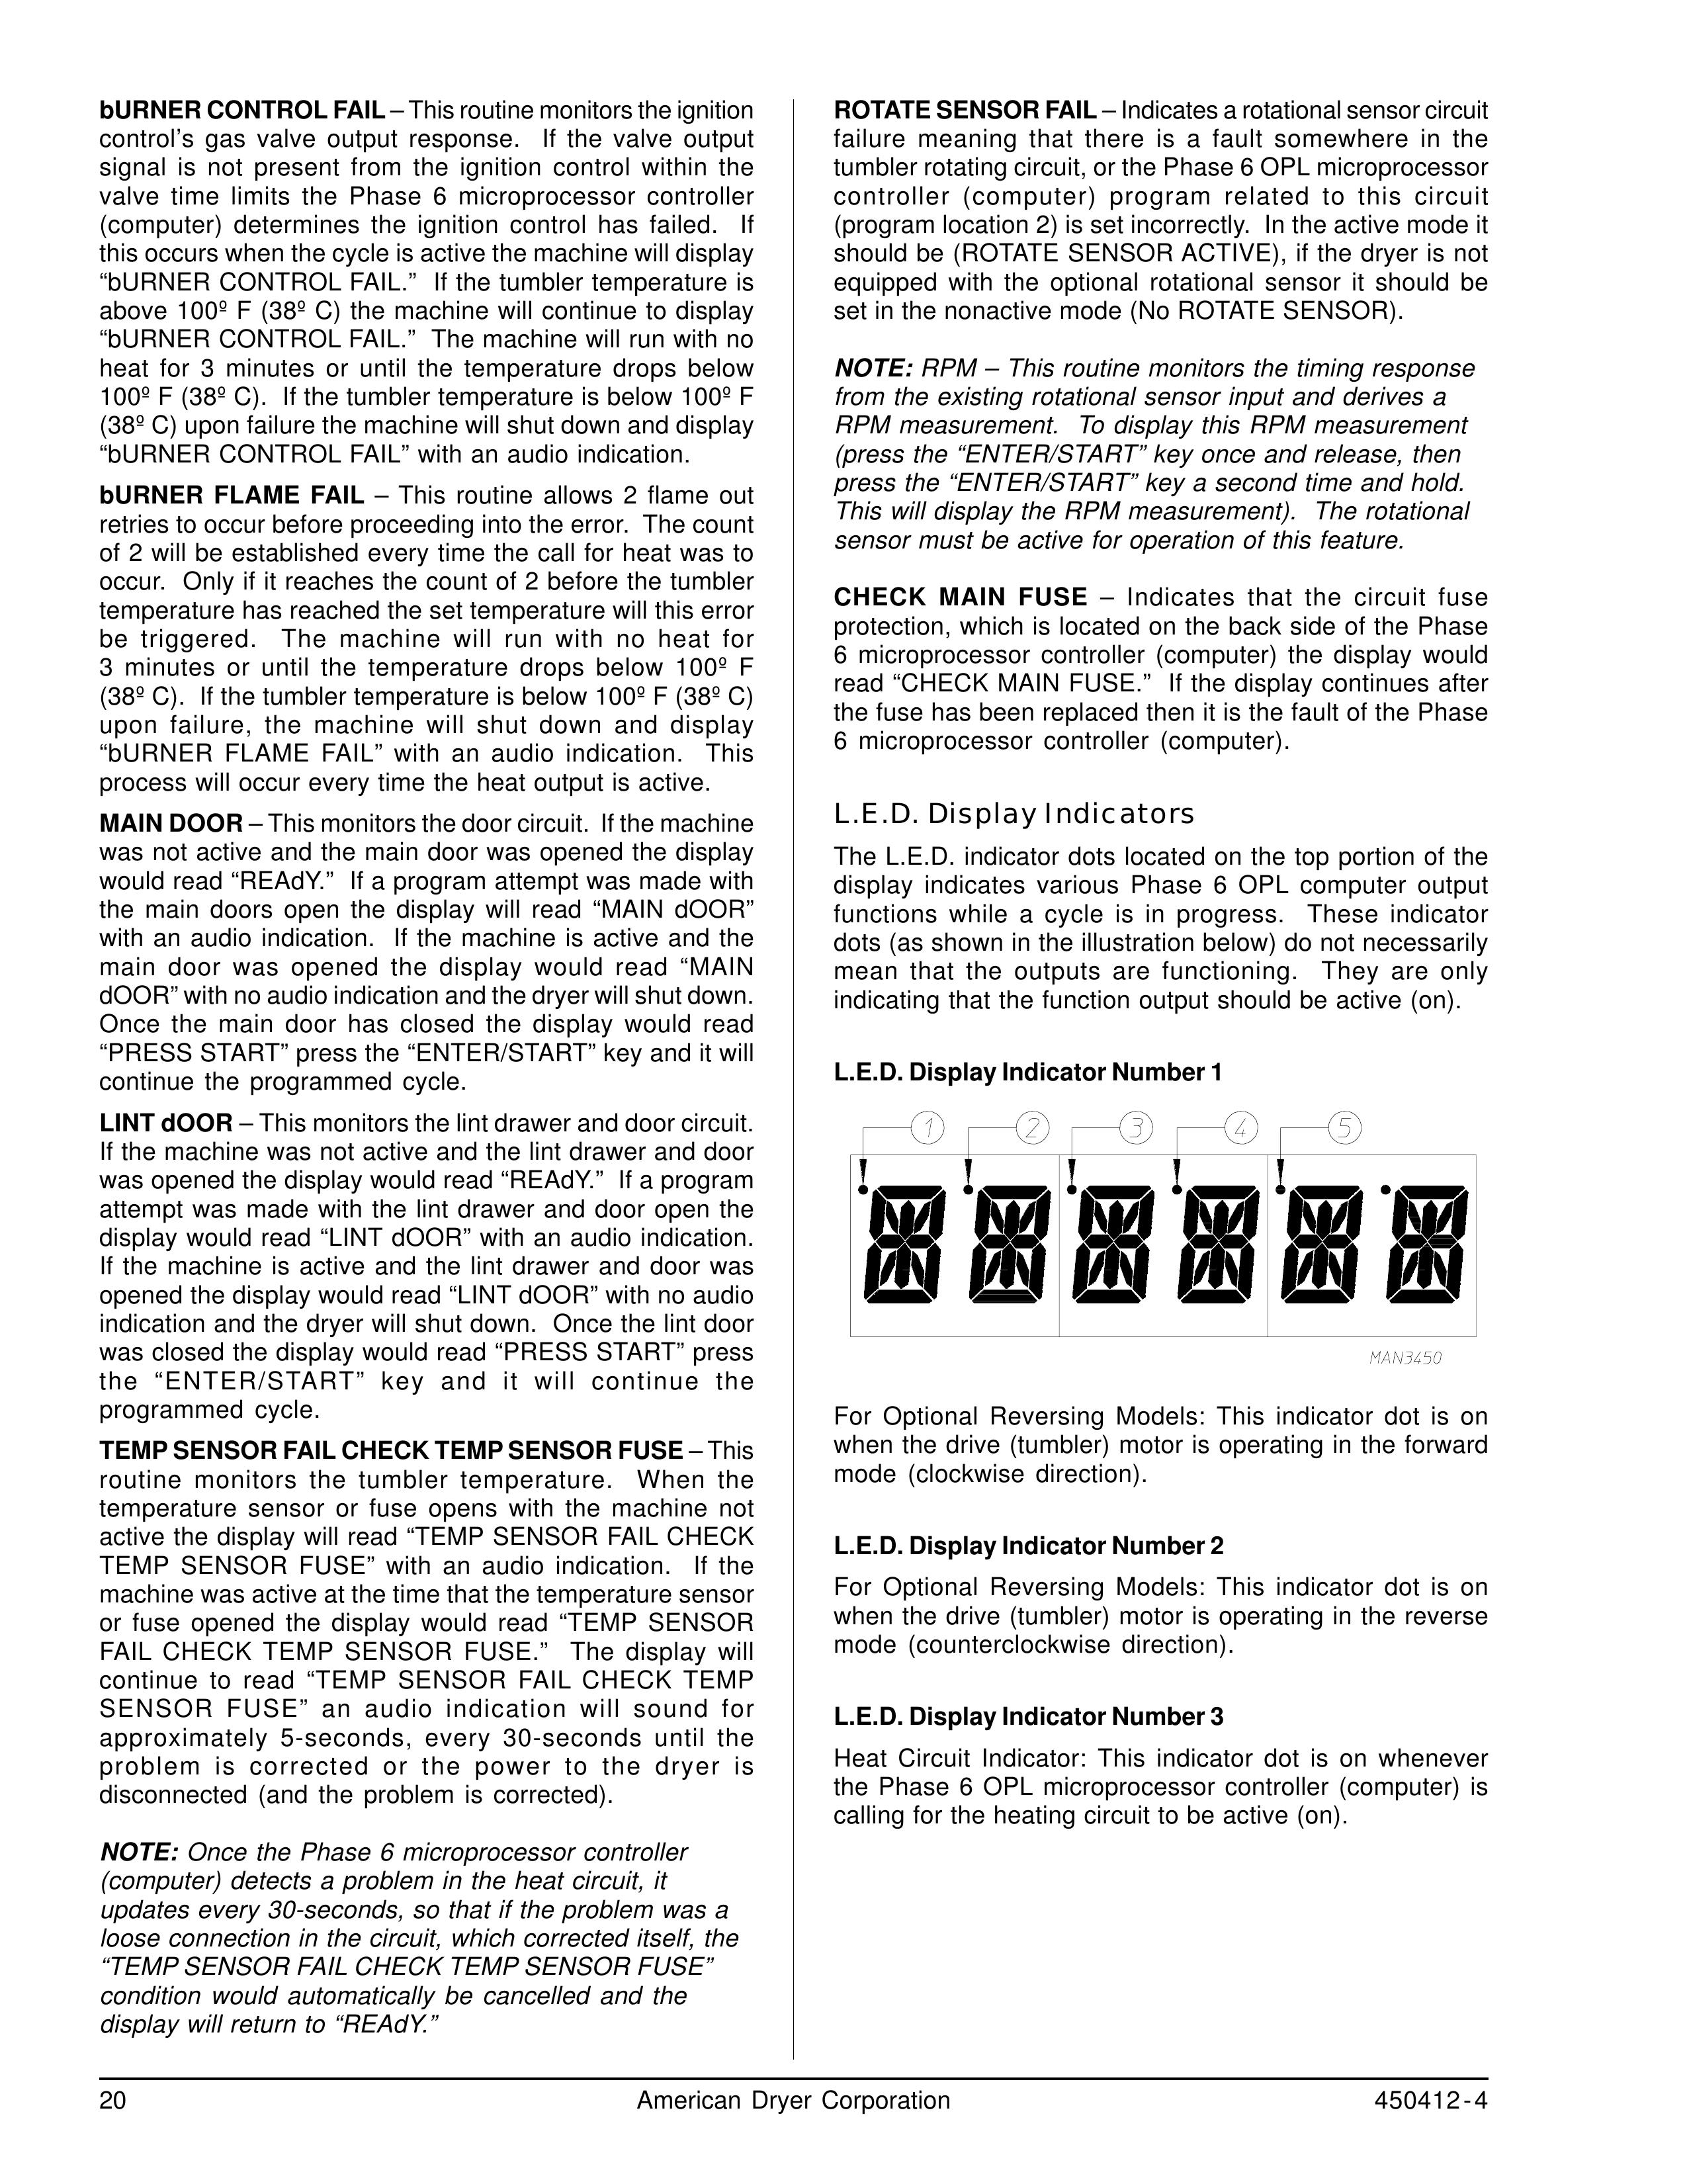 ADC ML-122 Clothes Dryer User Manual (Page 20)